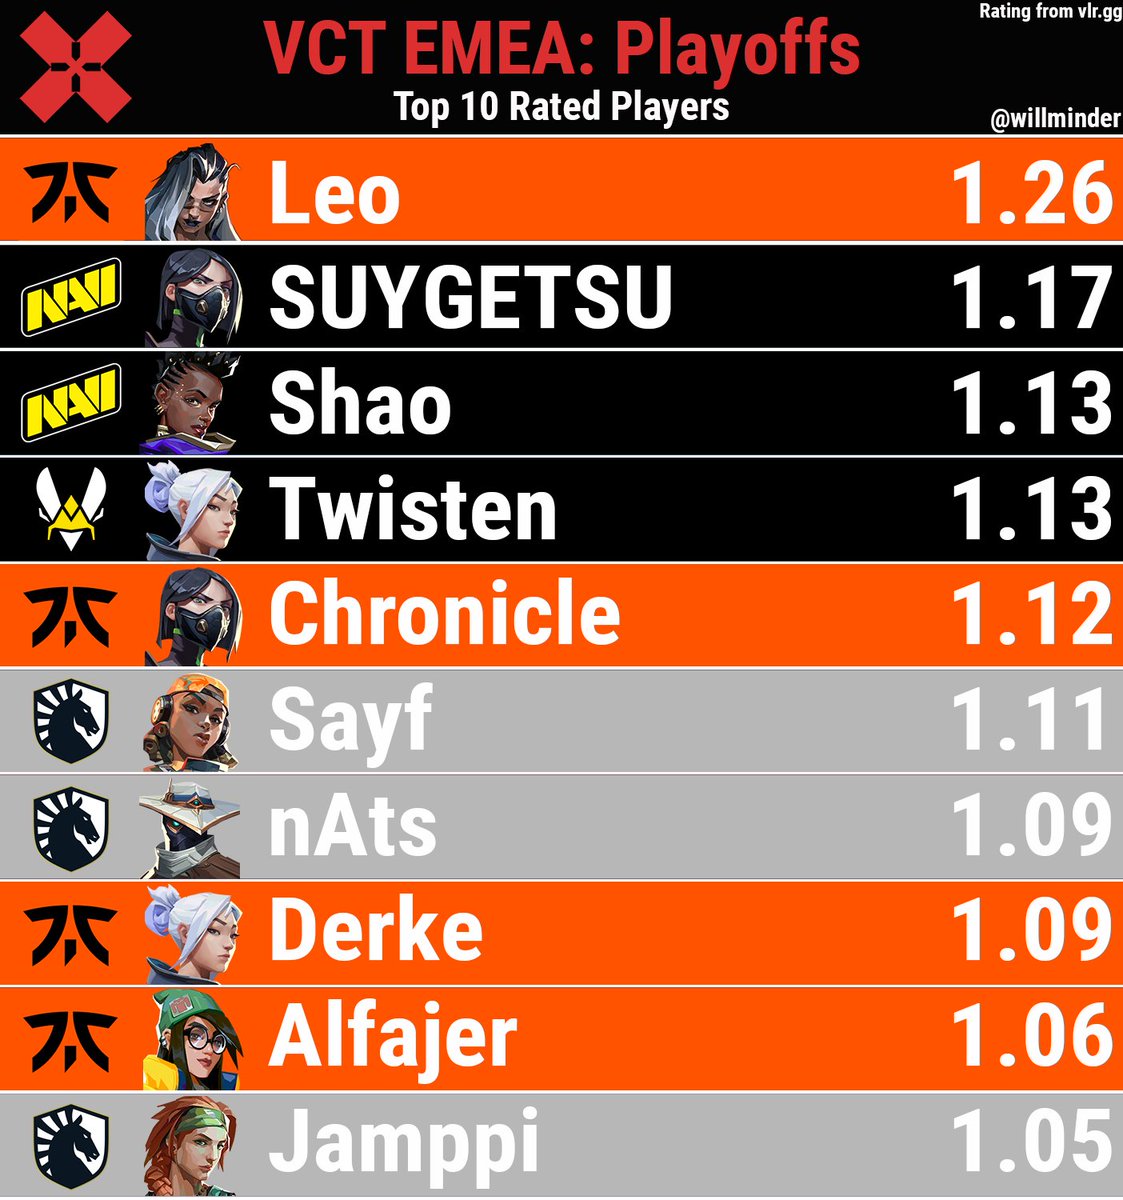 Top 10 Rated Players from the VCT EMEA Playoffs